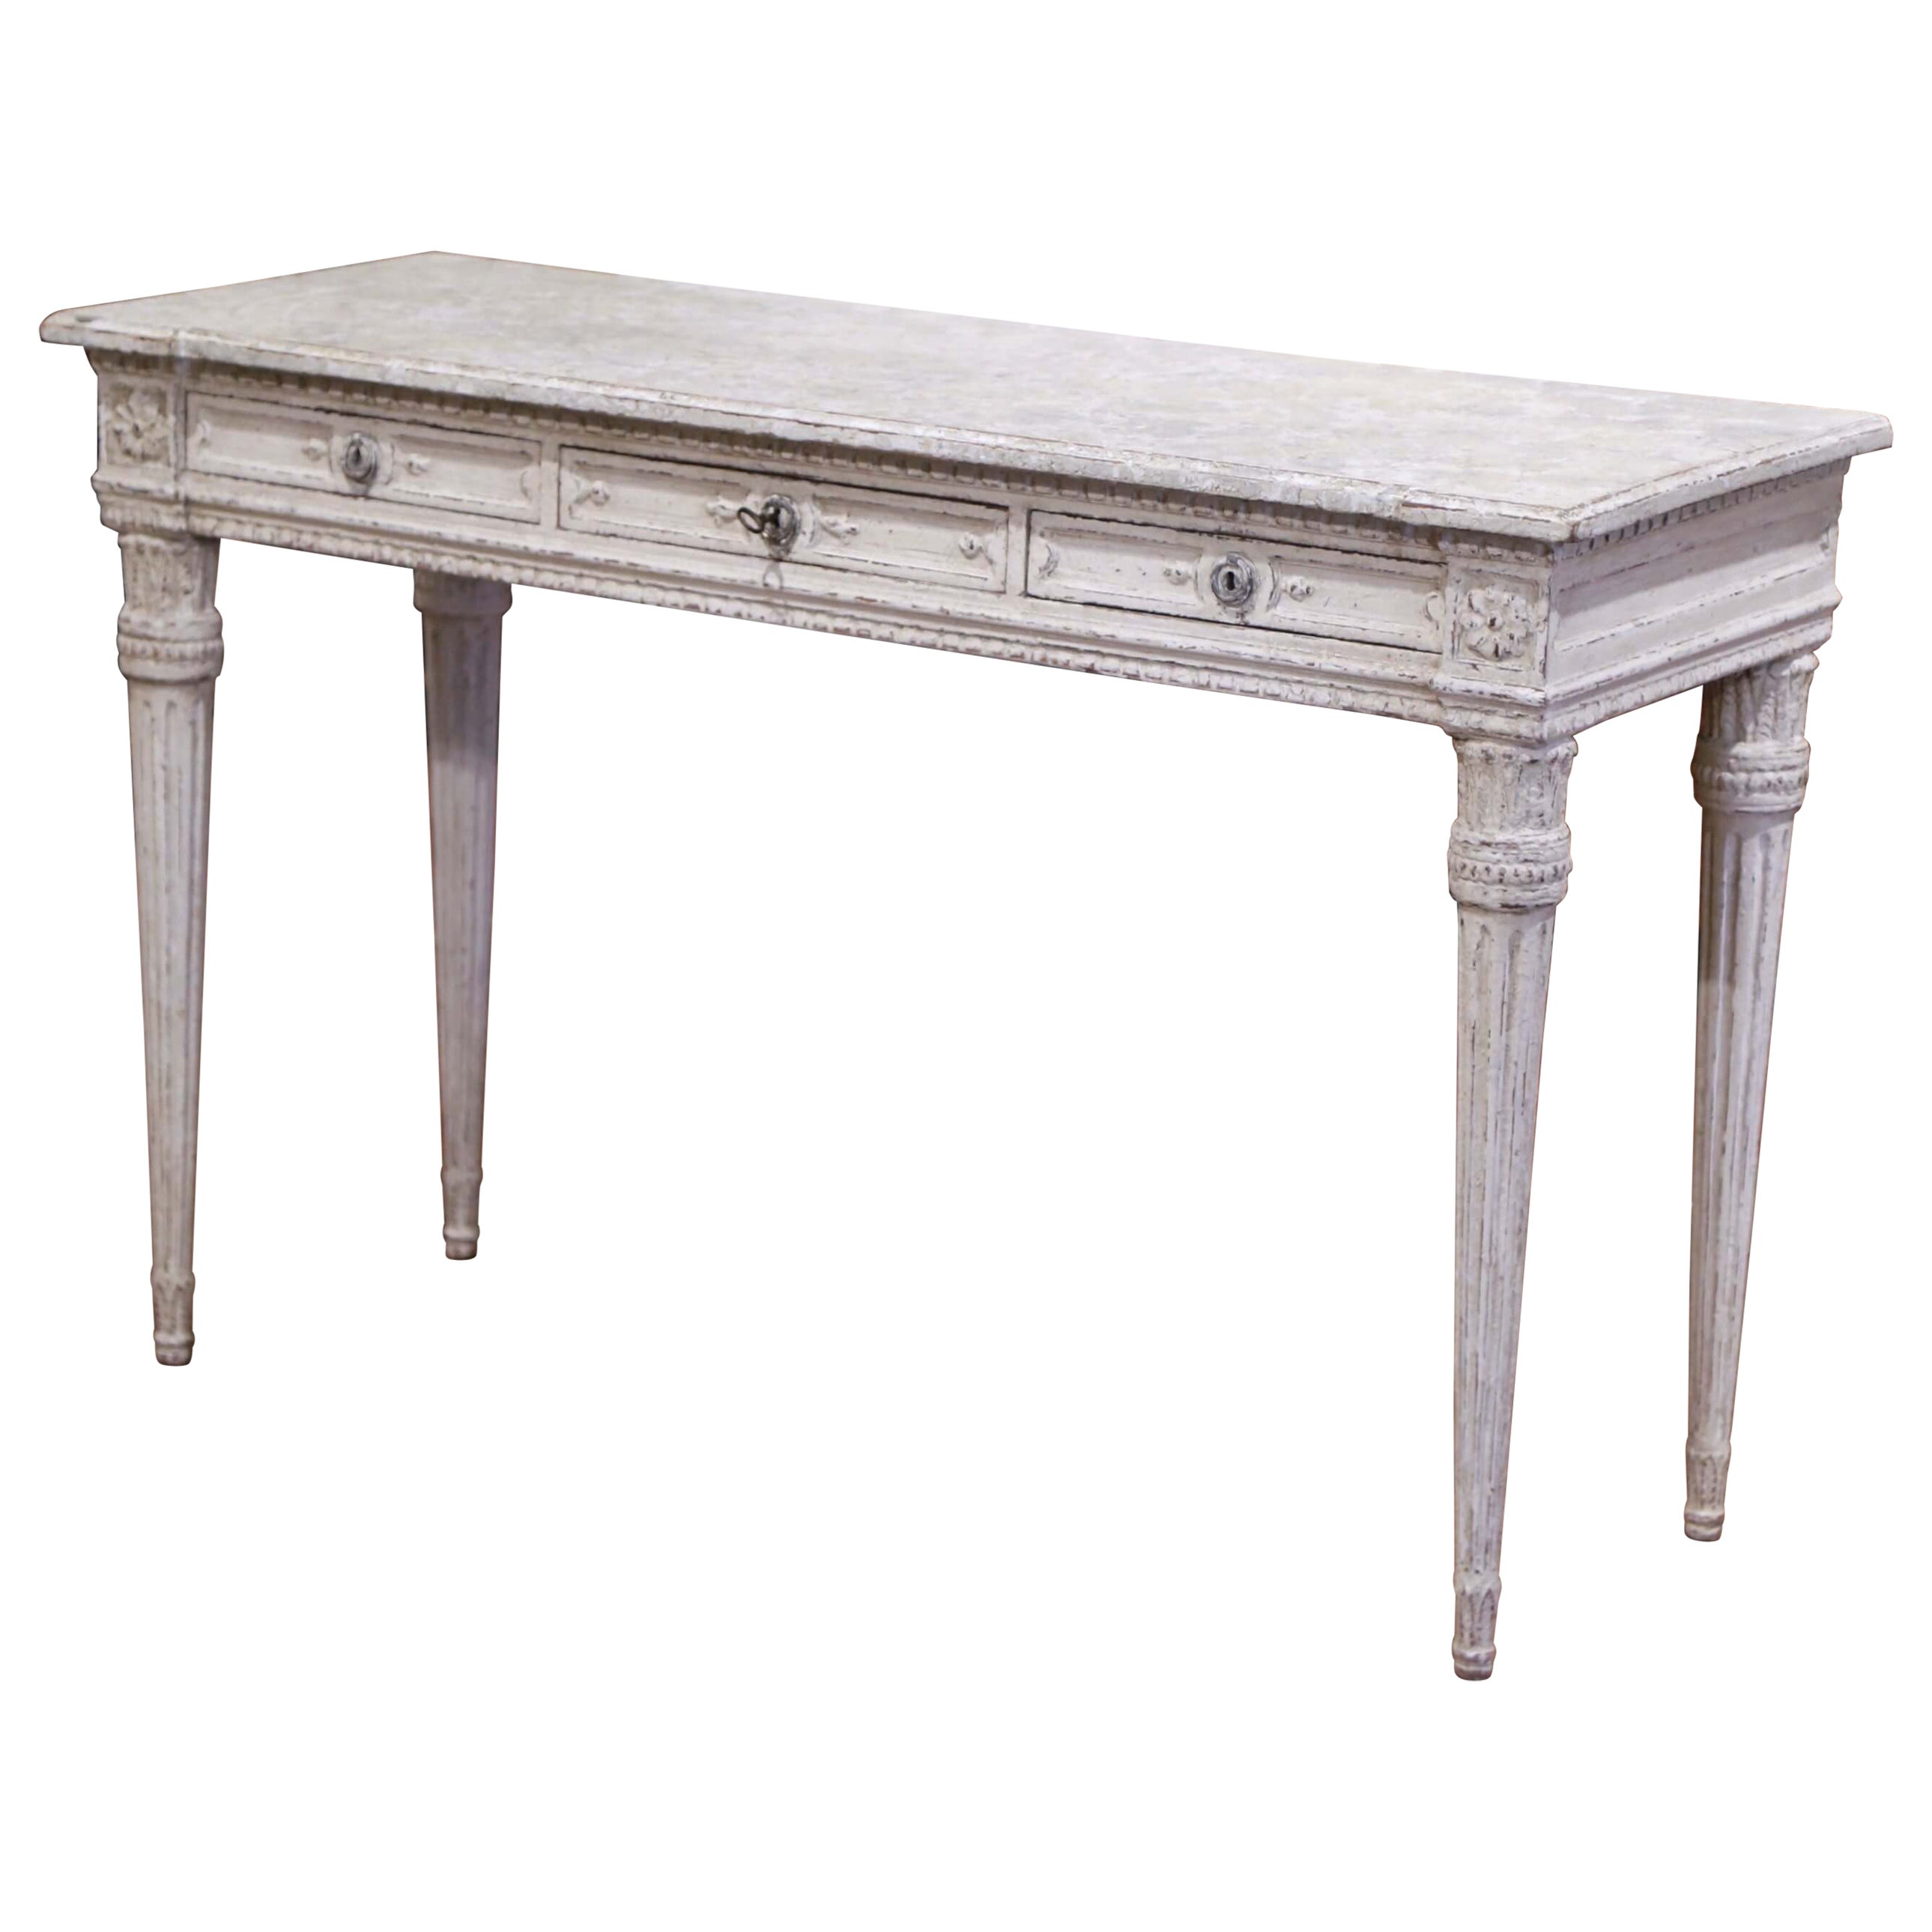 19th Century French Louis XVI Carved Painted Table Console with Faux Marble Top For Sale